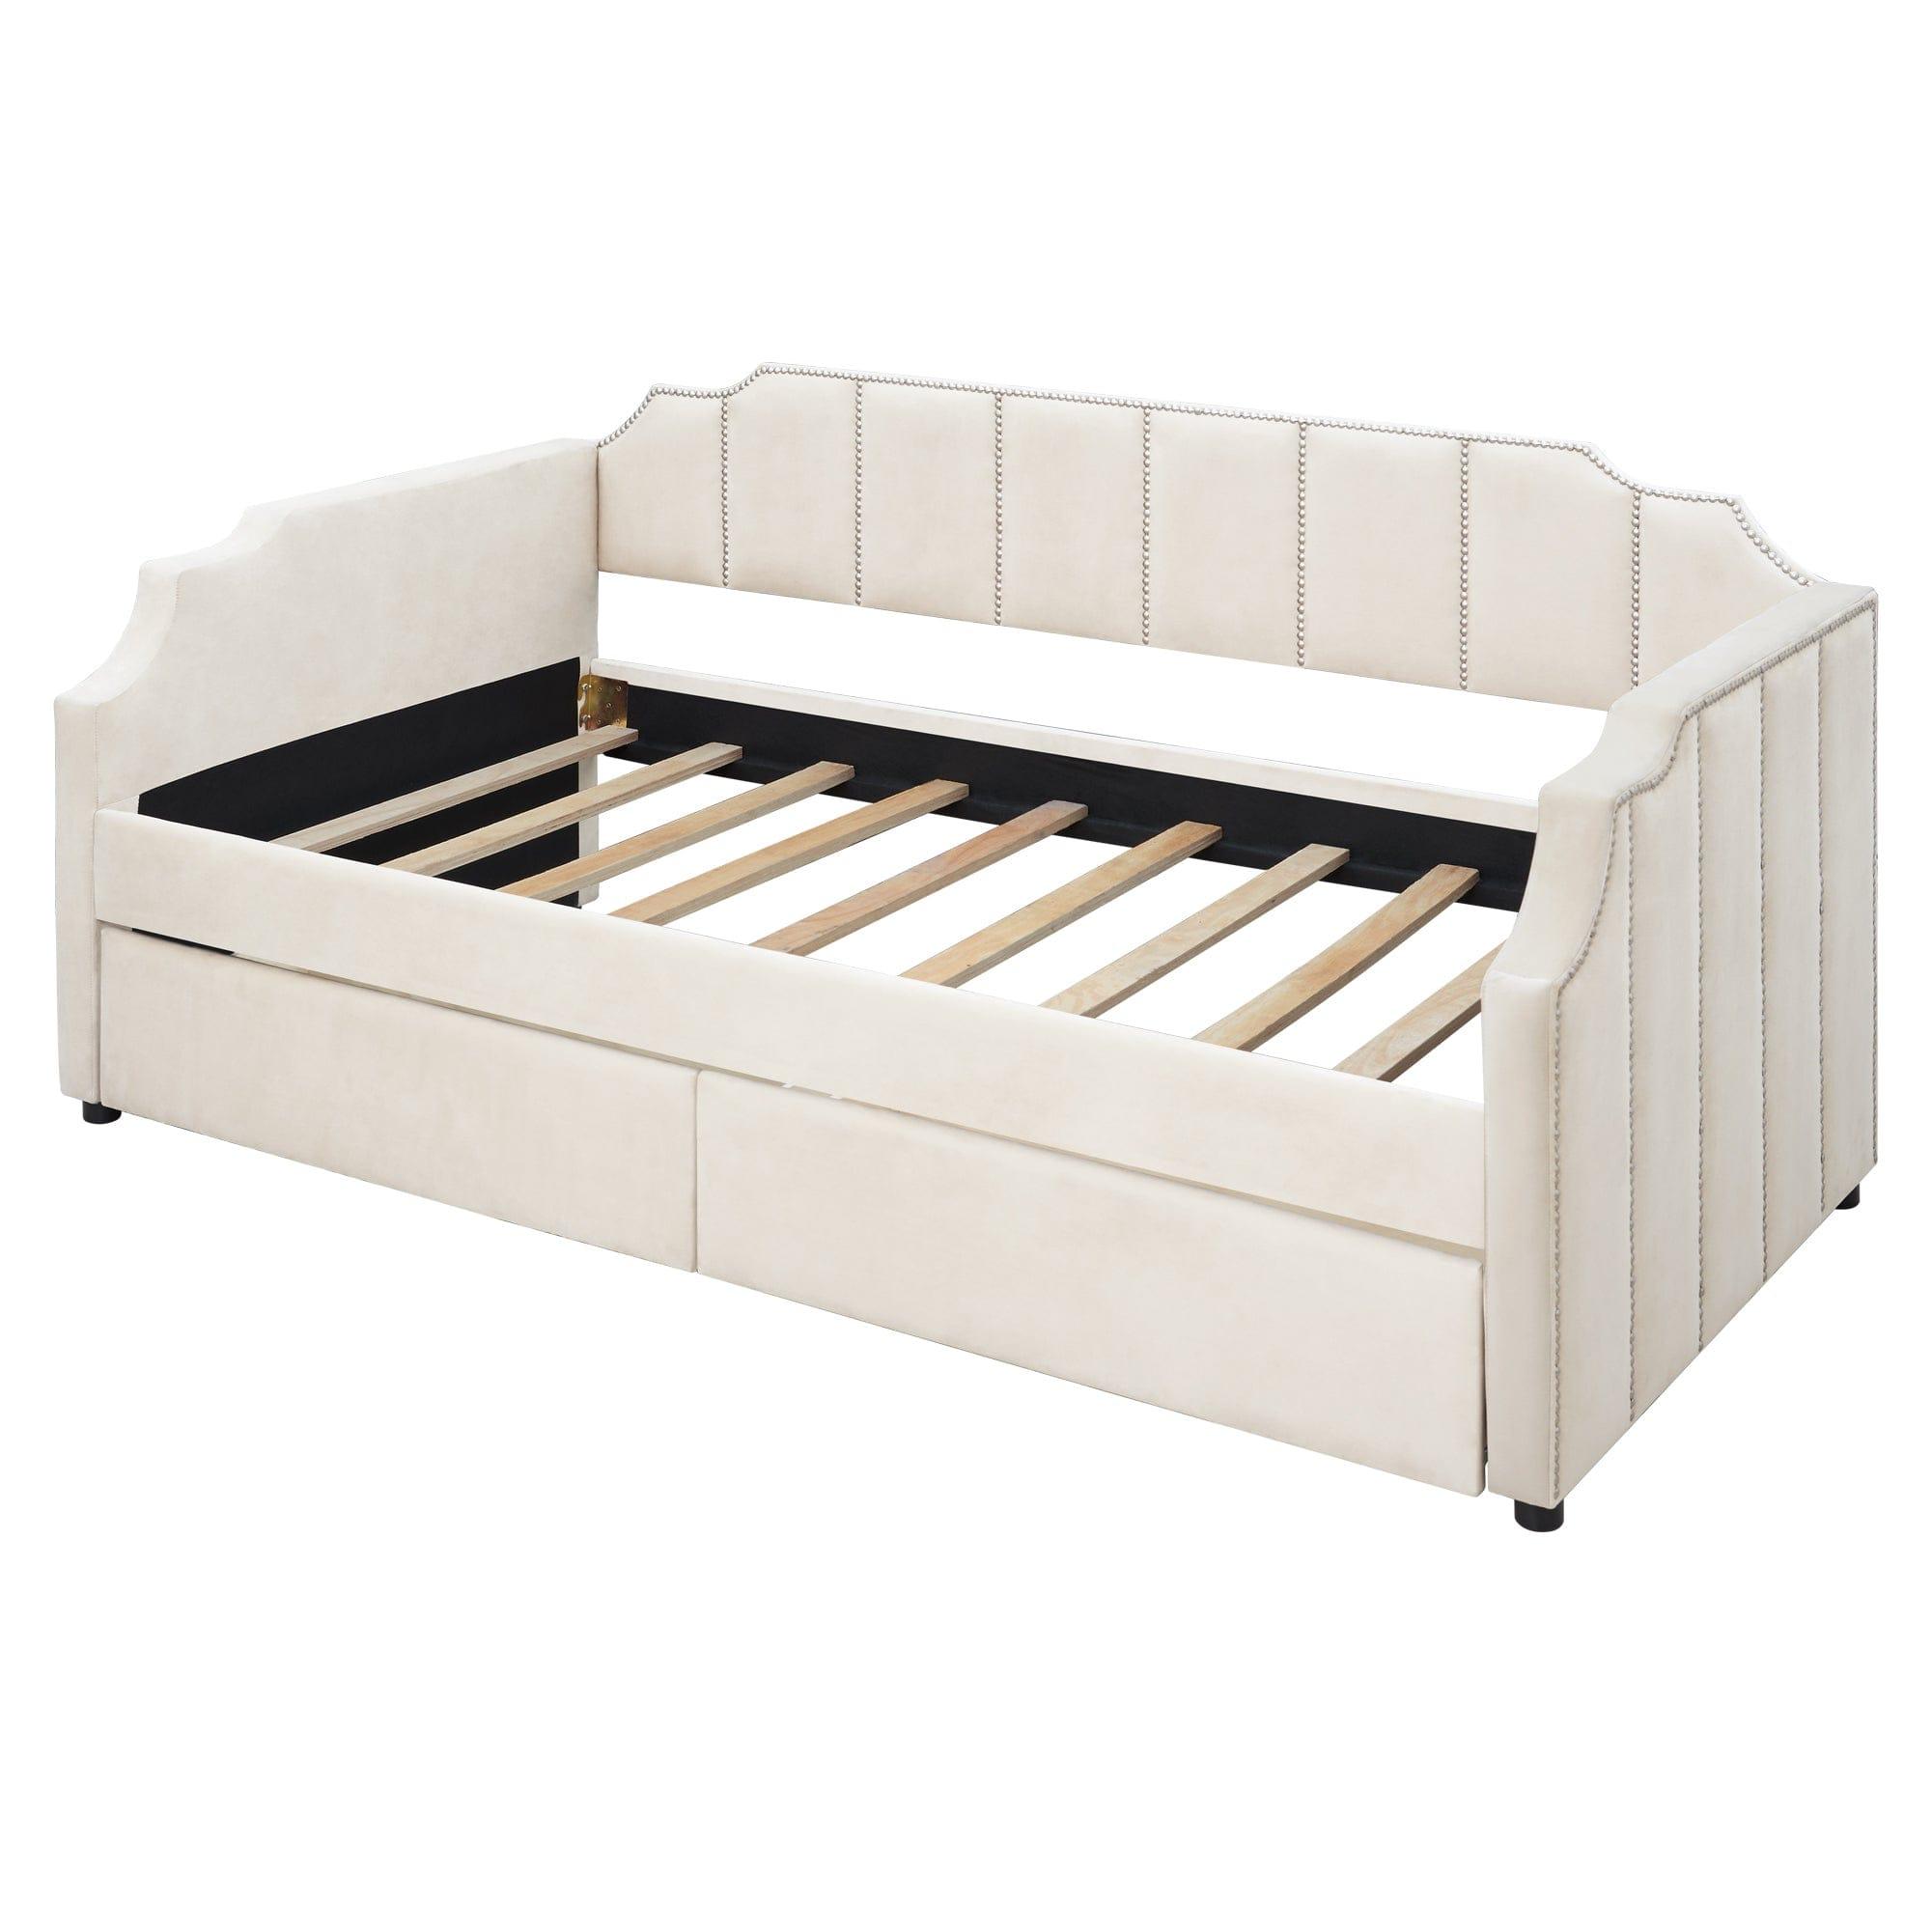 Shop Twin Size Upholstered daybed with Drawers, Wood Slat Support, Beige Mademoiselle Home Decor